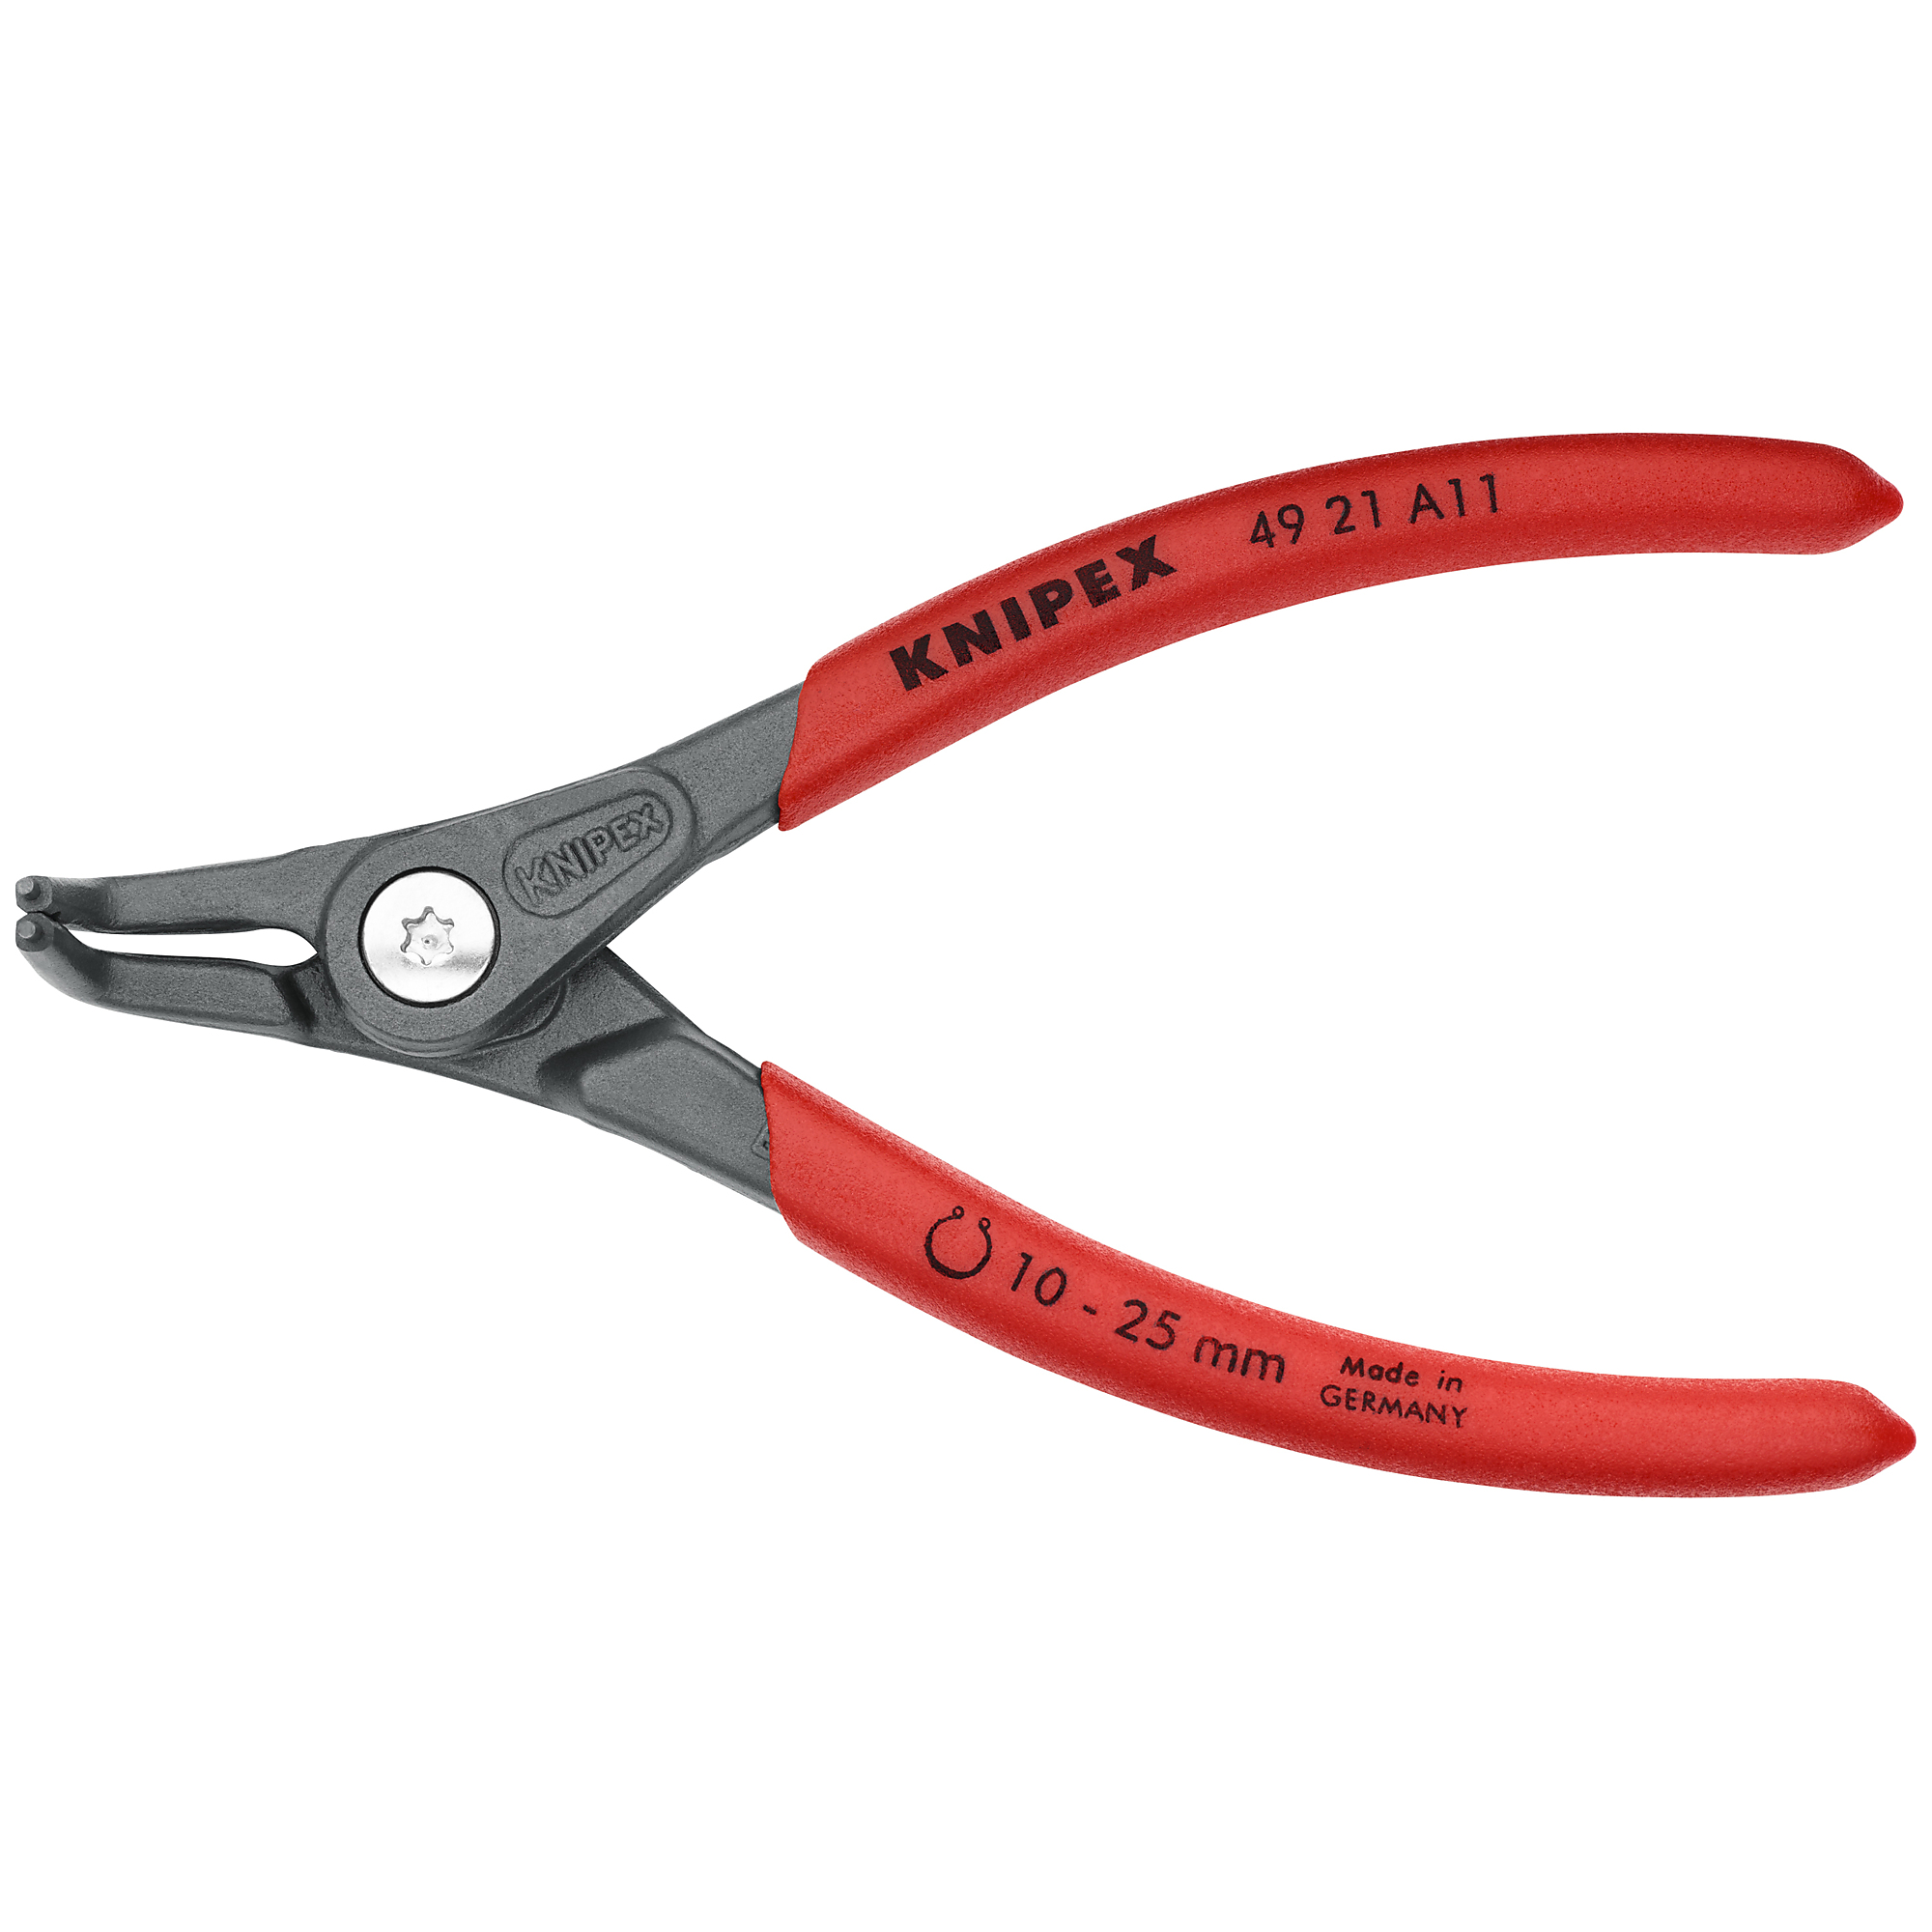 KNIPEX, Ext 90Â° Prec. Snap Ring Pliers, 3/64 tip, 5.125Inch, Pieces (qty.) 1 Material Steel, Model 49 21 A11